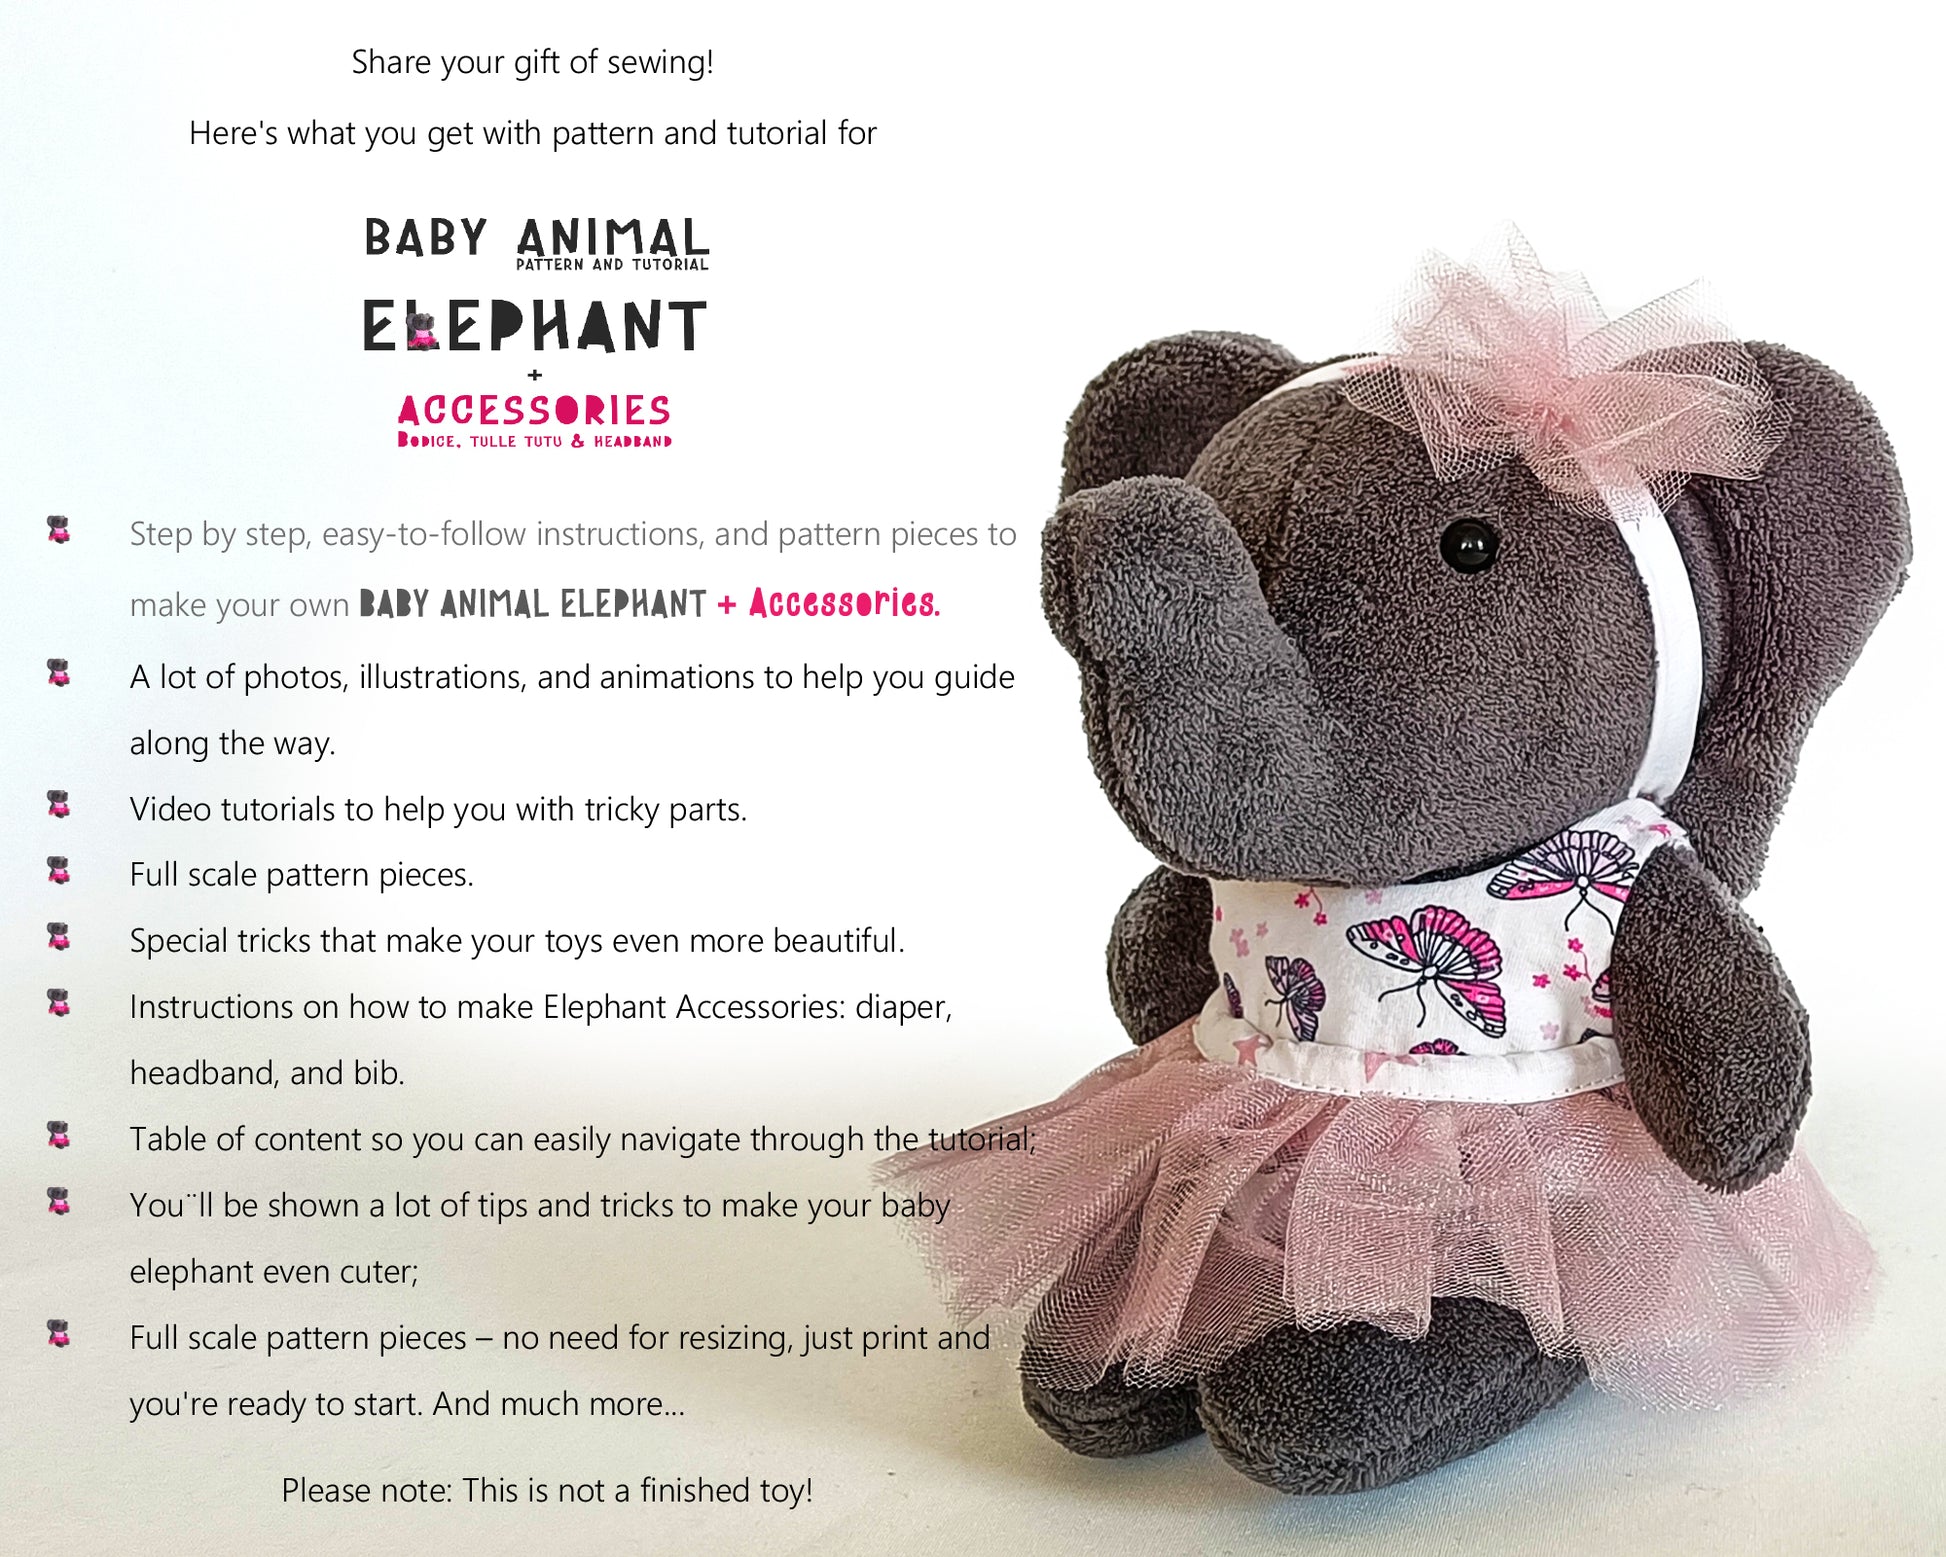 Baby Animal Elephant - PDF sewing pattern and tutorial 09